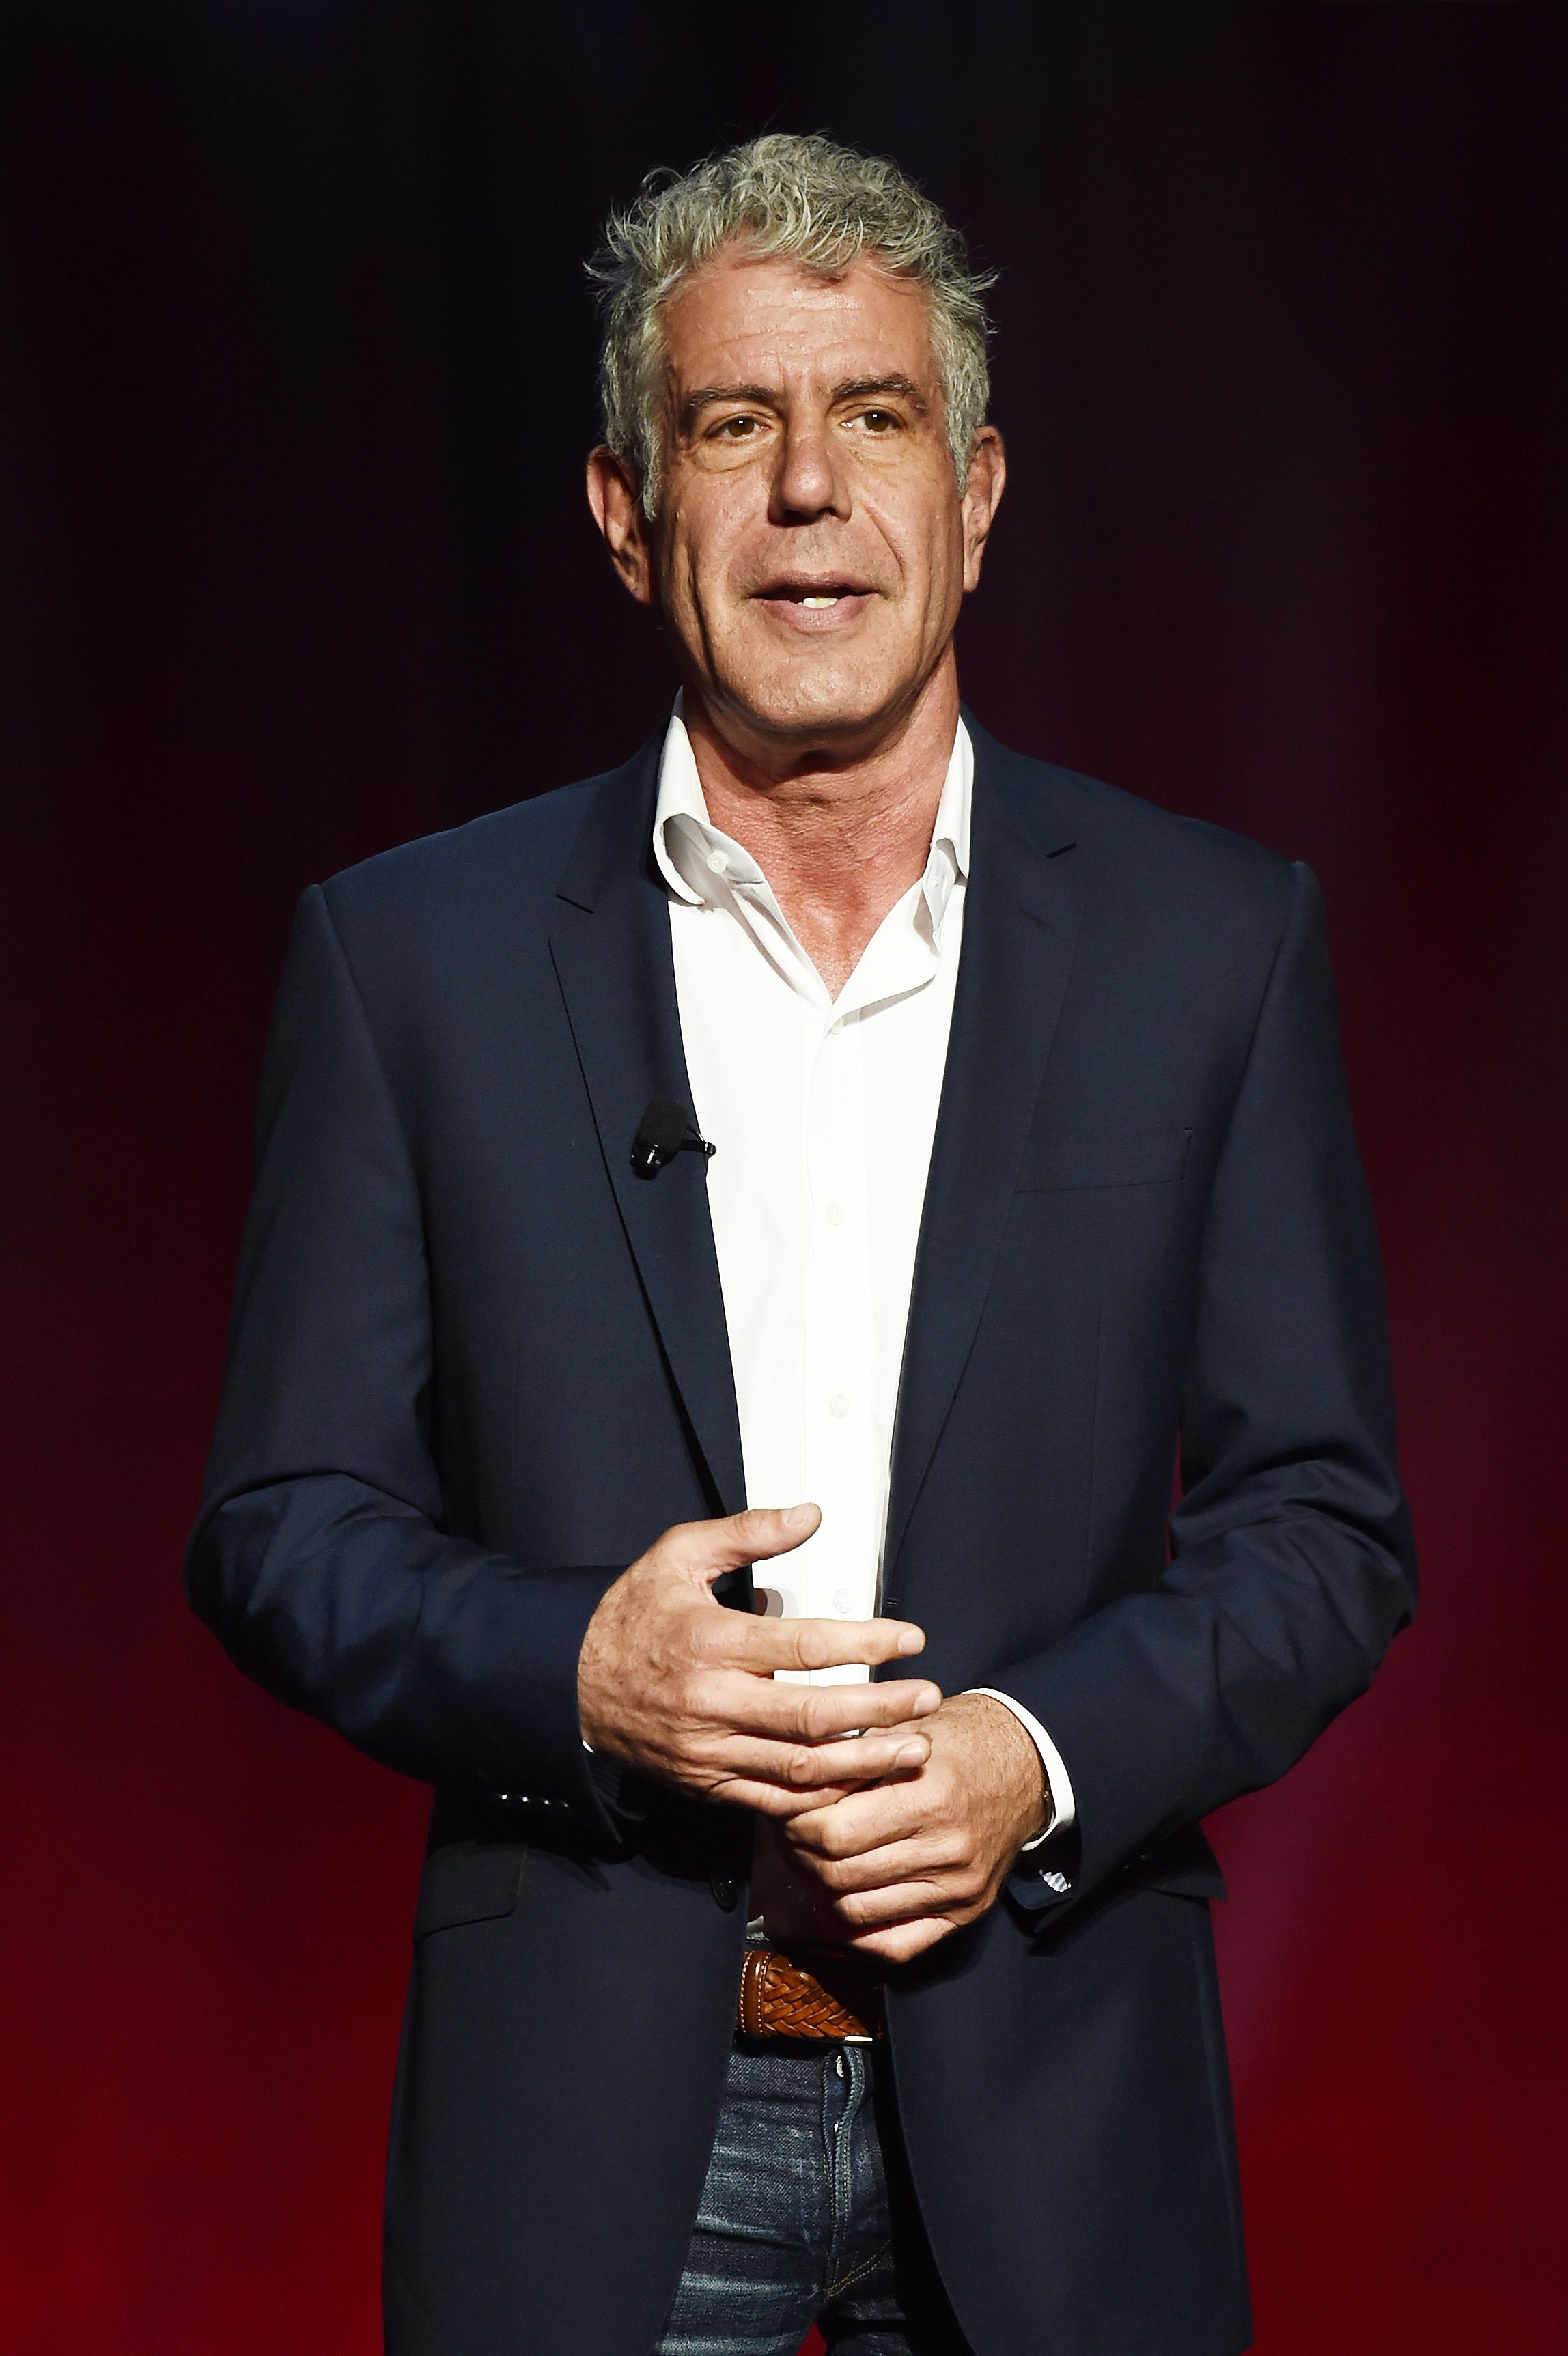 https://hips.hearstapps.com/hmg-prod.s3.amazonaws.com/images/chef-anthony-bourdain-speaks-on-stage-during-the-turner-news-photo-1589330473.jpg